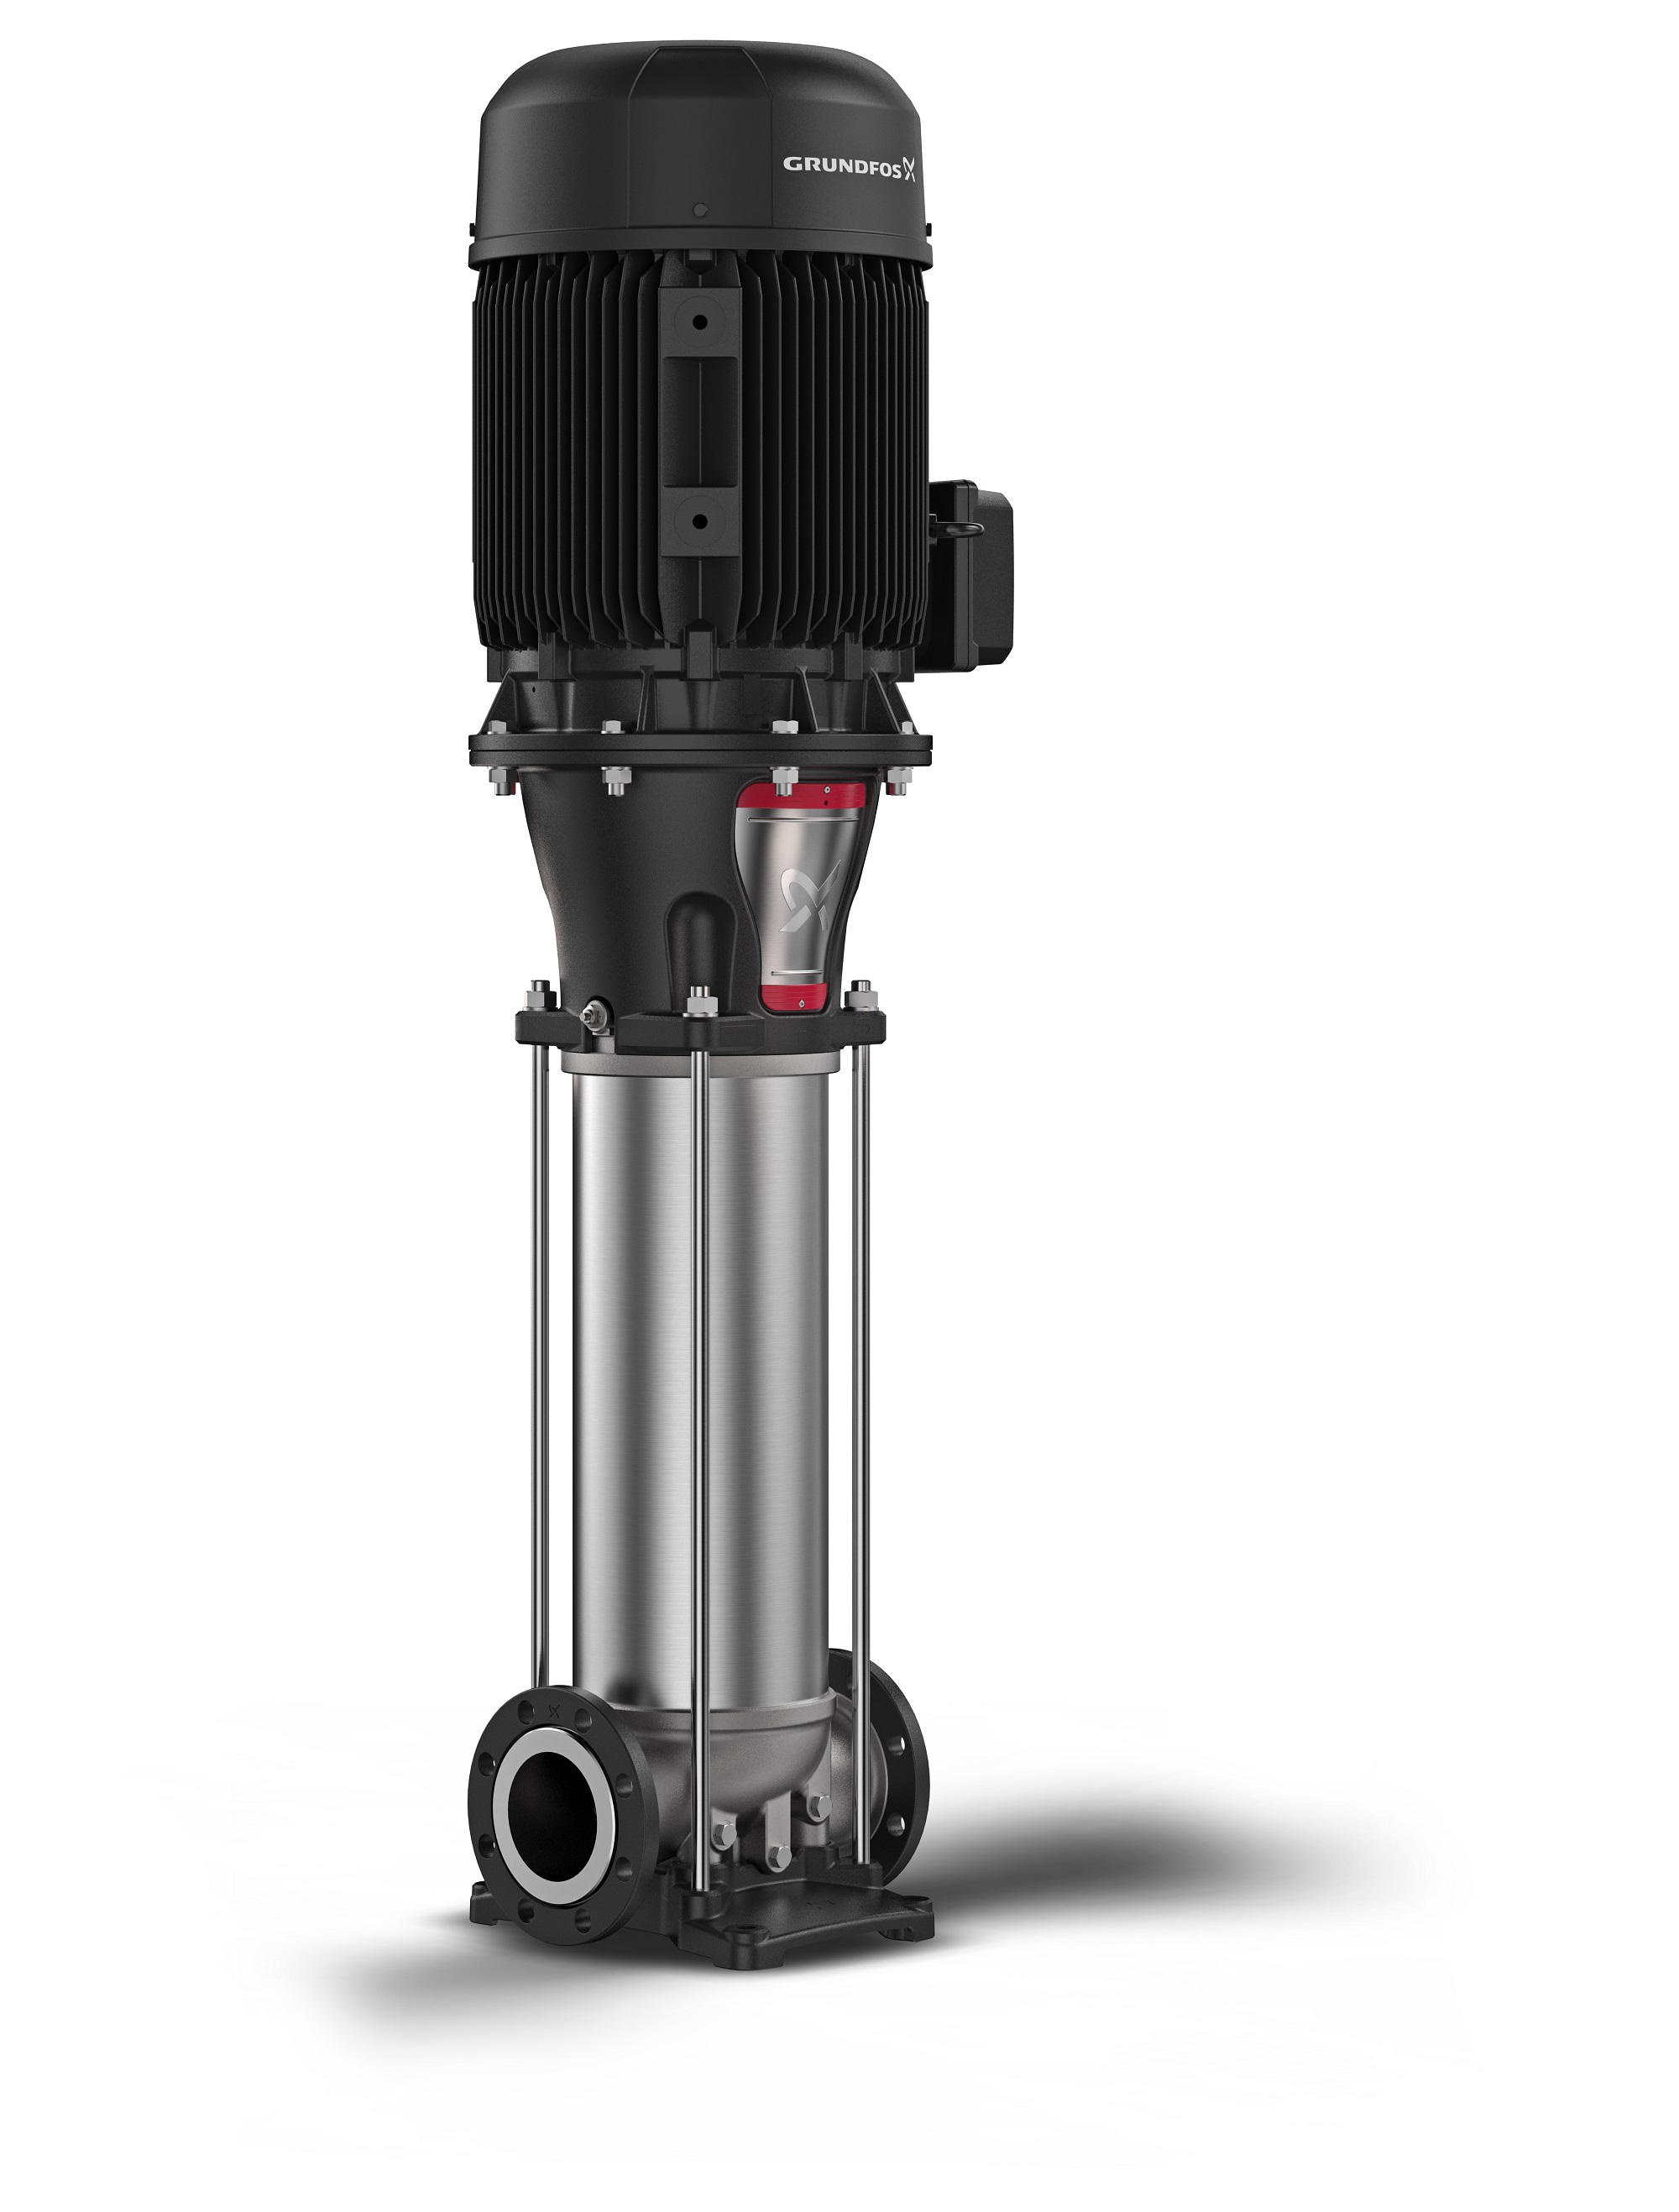 The new generation of Grundfos CR vertical multi-stage centrifugal in-line pumps.